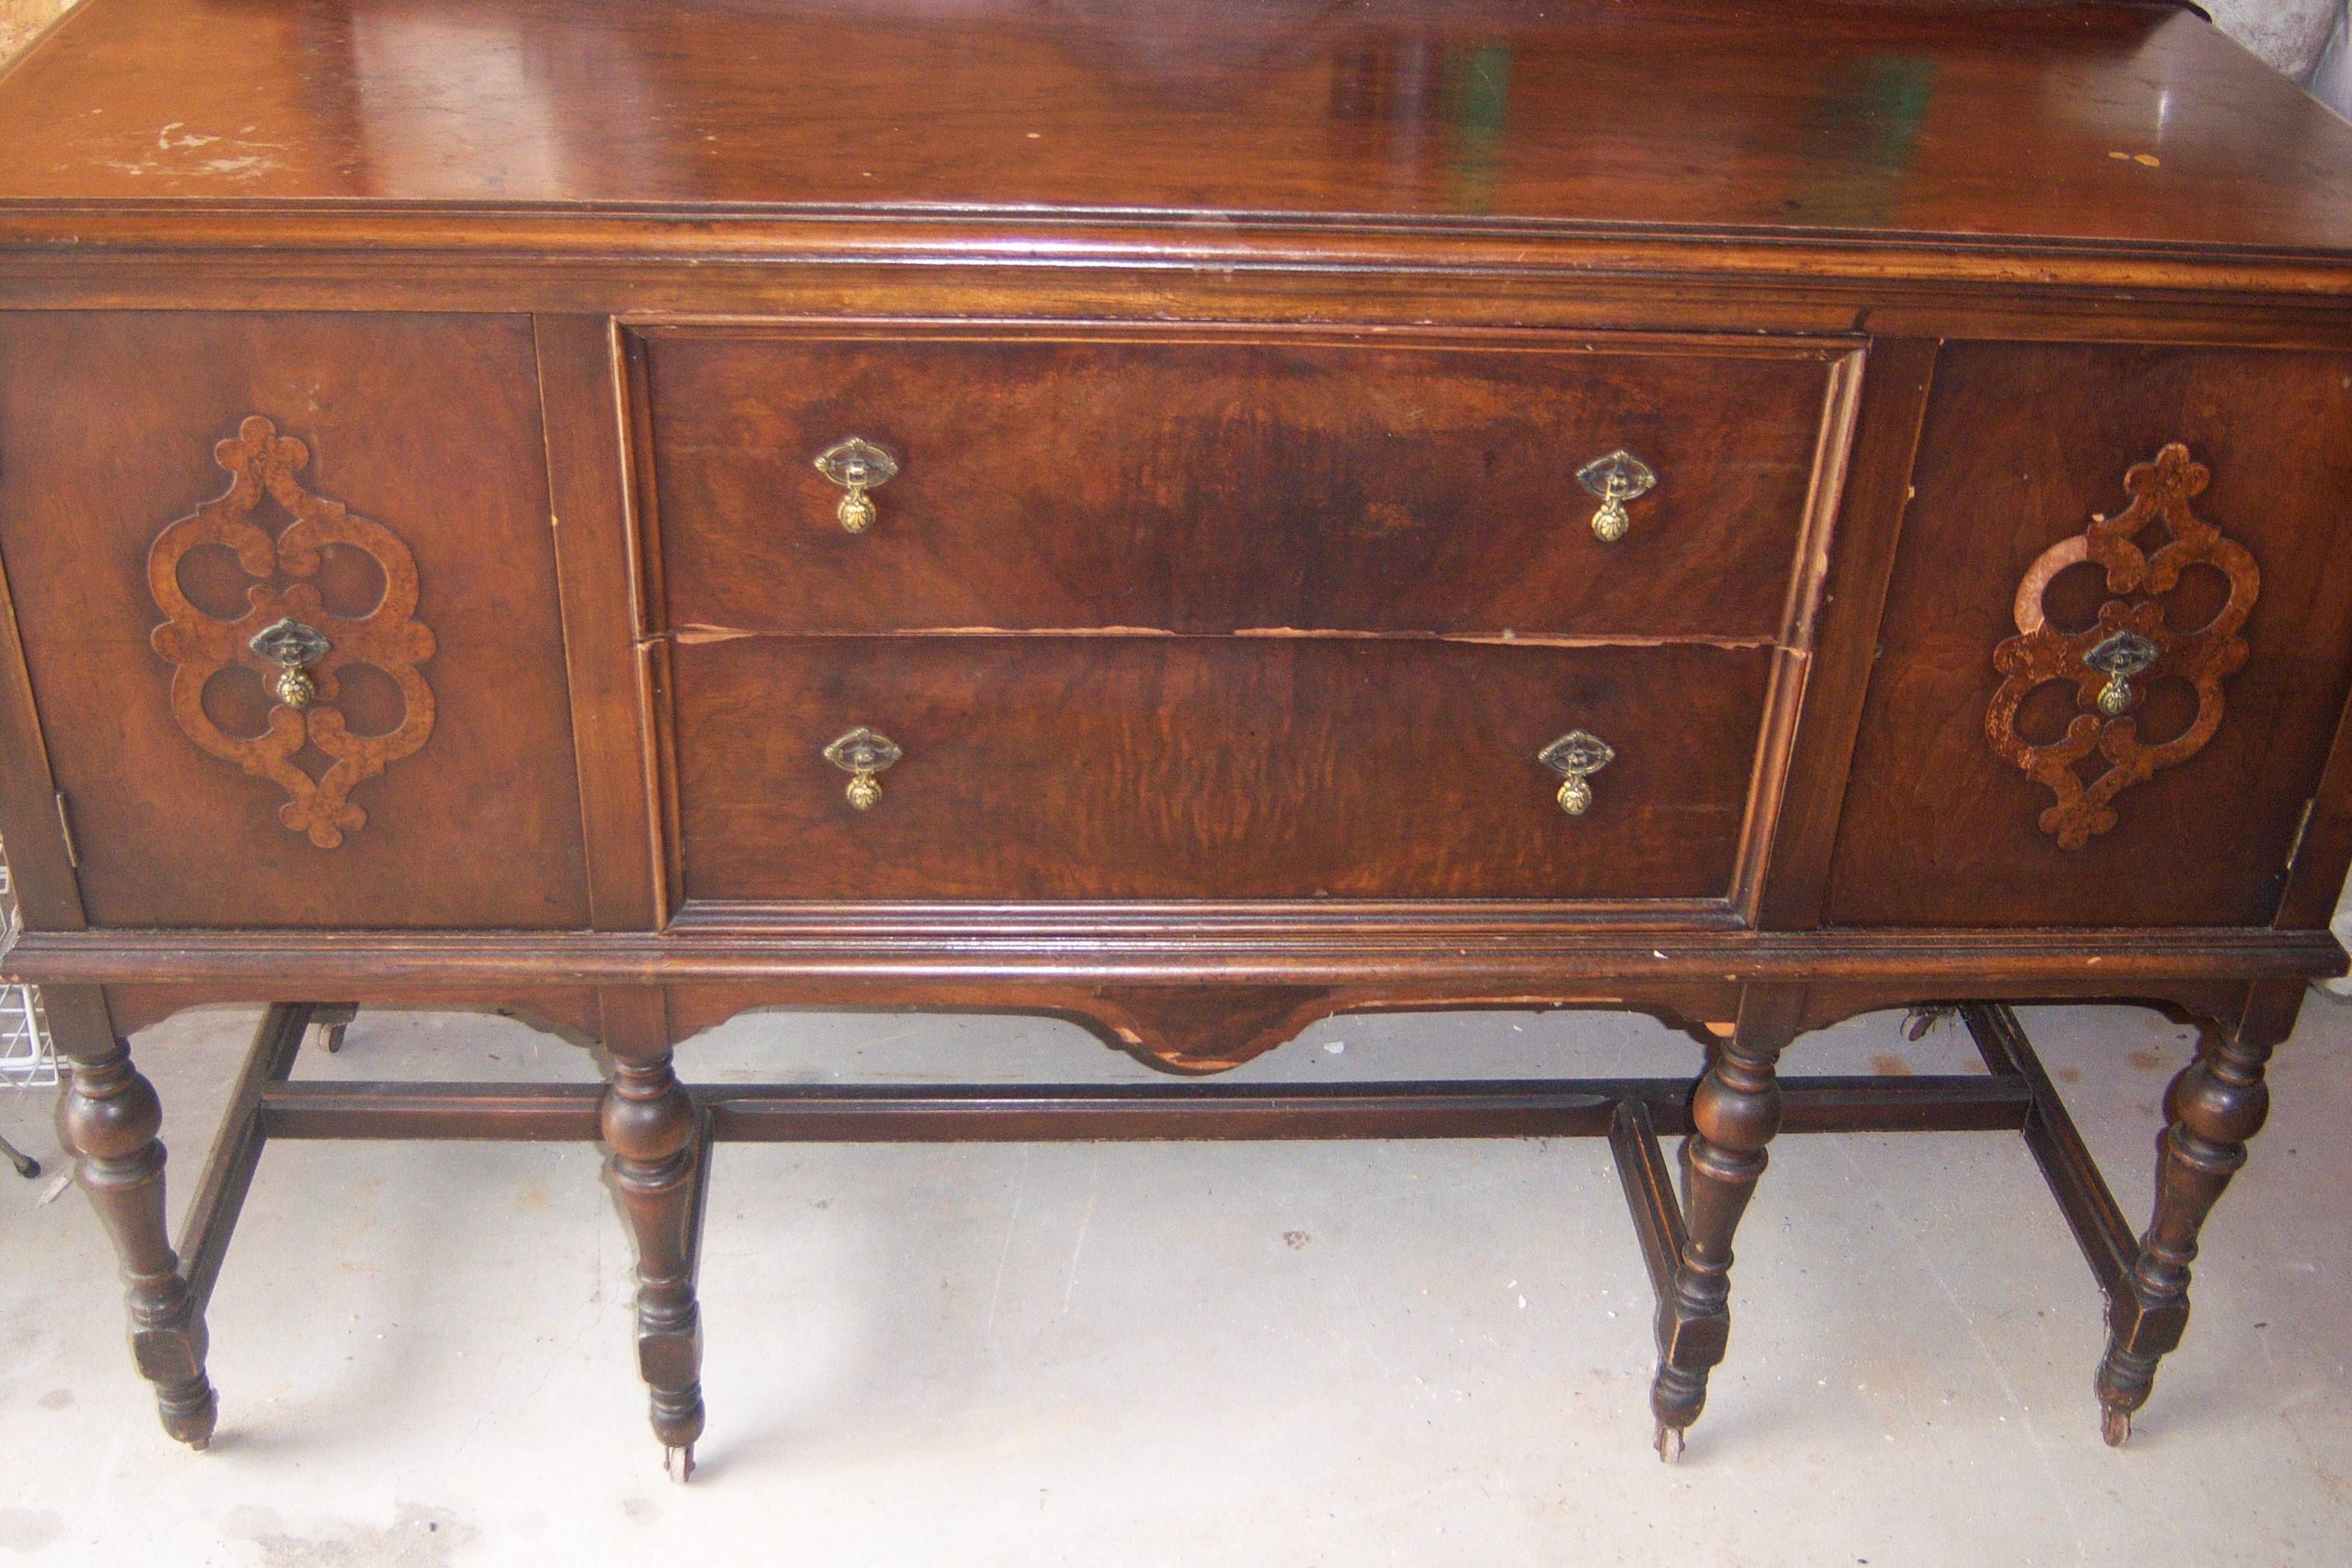 Antique Sideboard Buffet For Sale | Antiques | Classifieds Inside Sideboard Sale (View 19 of 20)